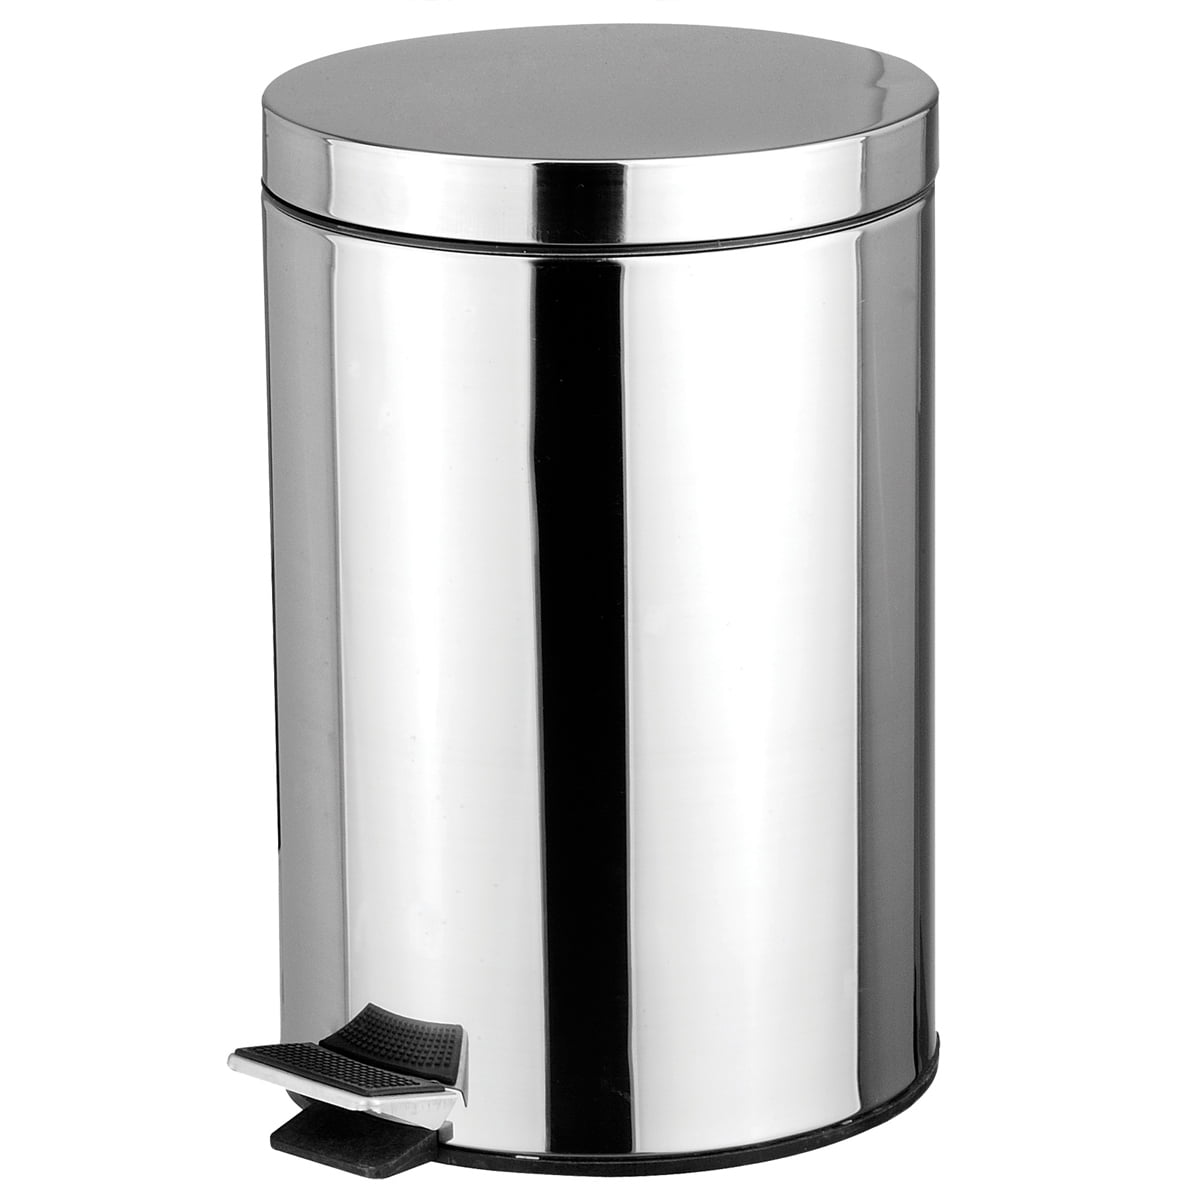 5L Grey Compact Pedal Bin Hands Free Use Kitchen Dustbin Waste Unit for Rubbish 